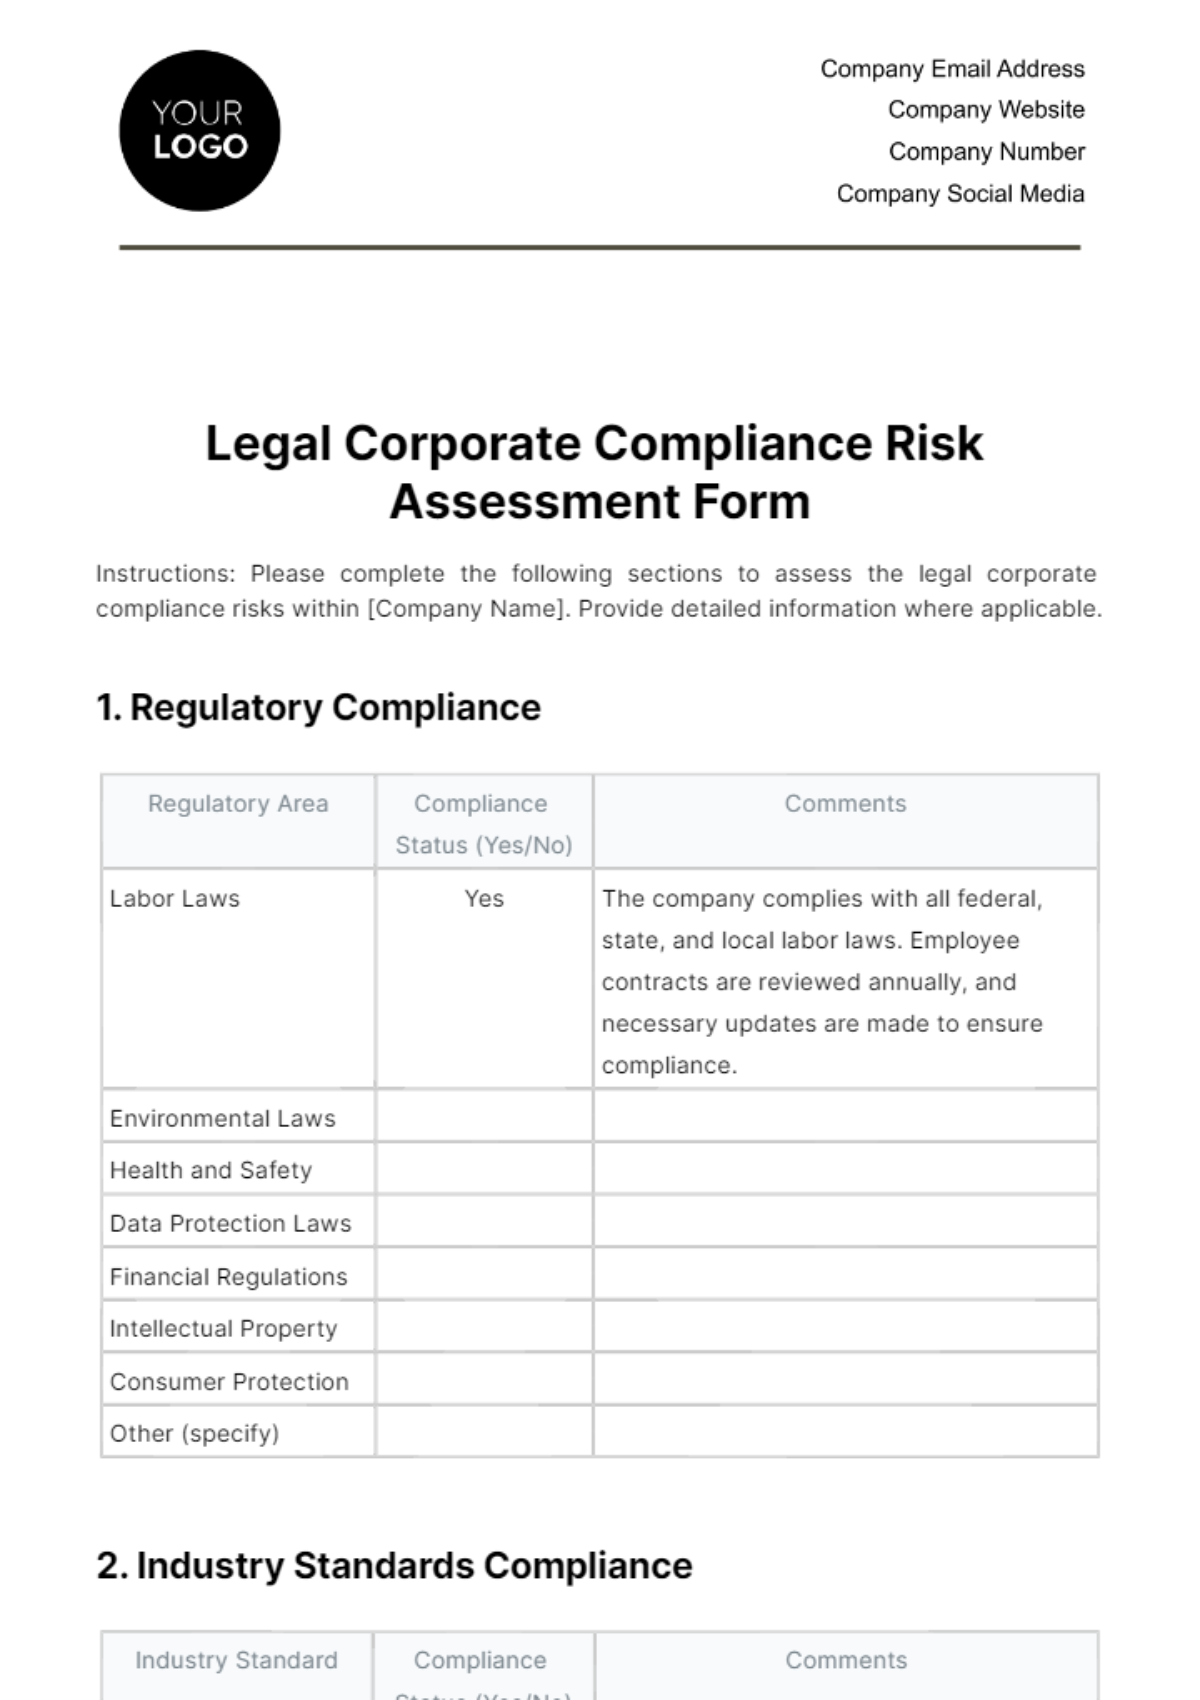 Legal Corporate Compliance Risk Assessment Form Template